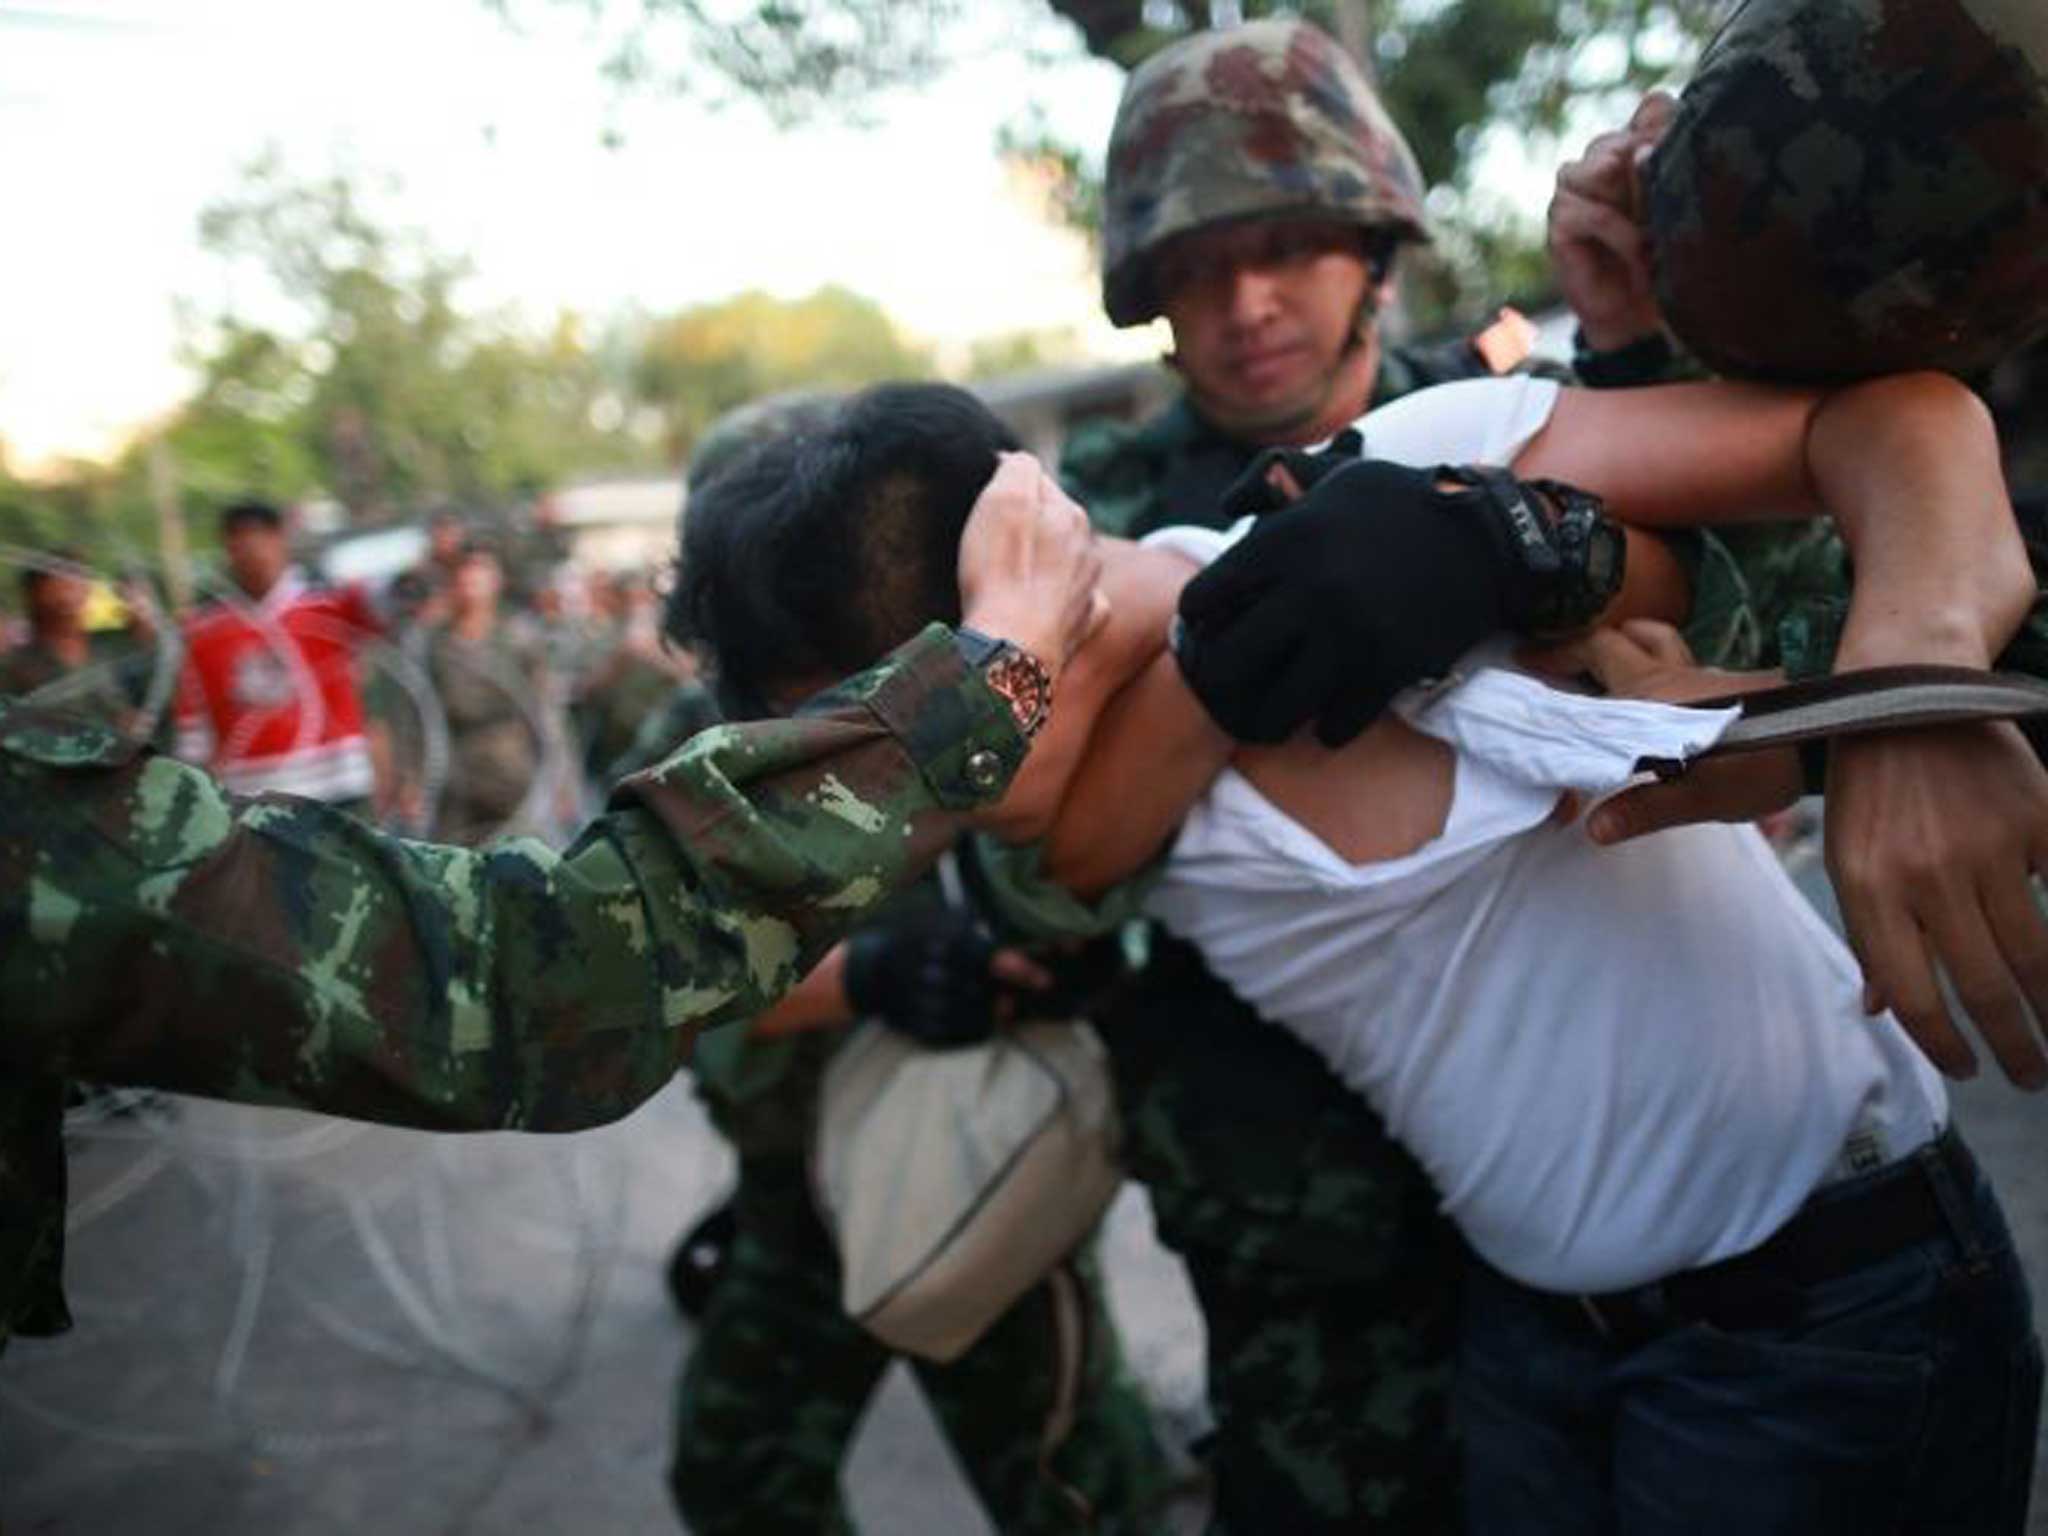 Soldiers grapple with a protester